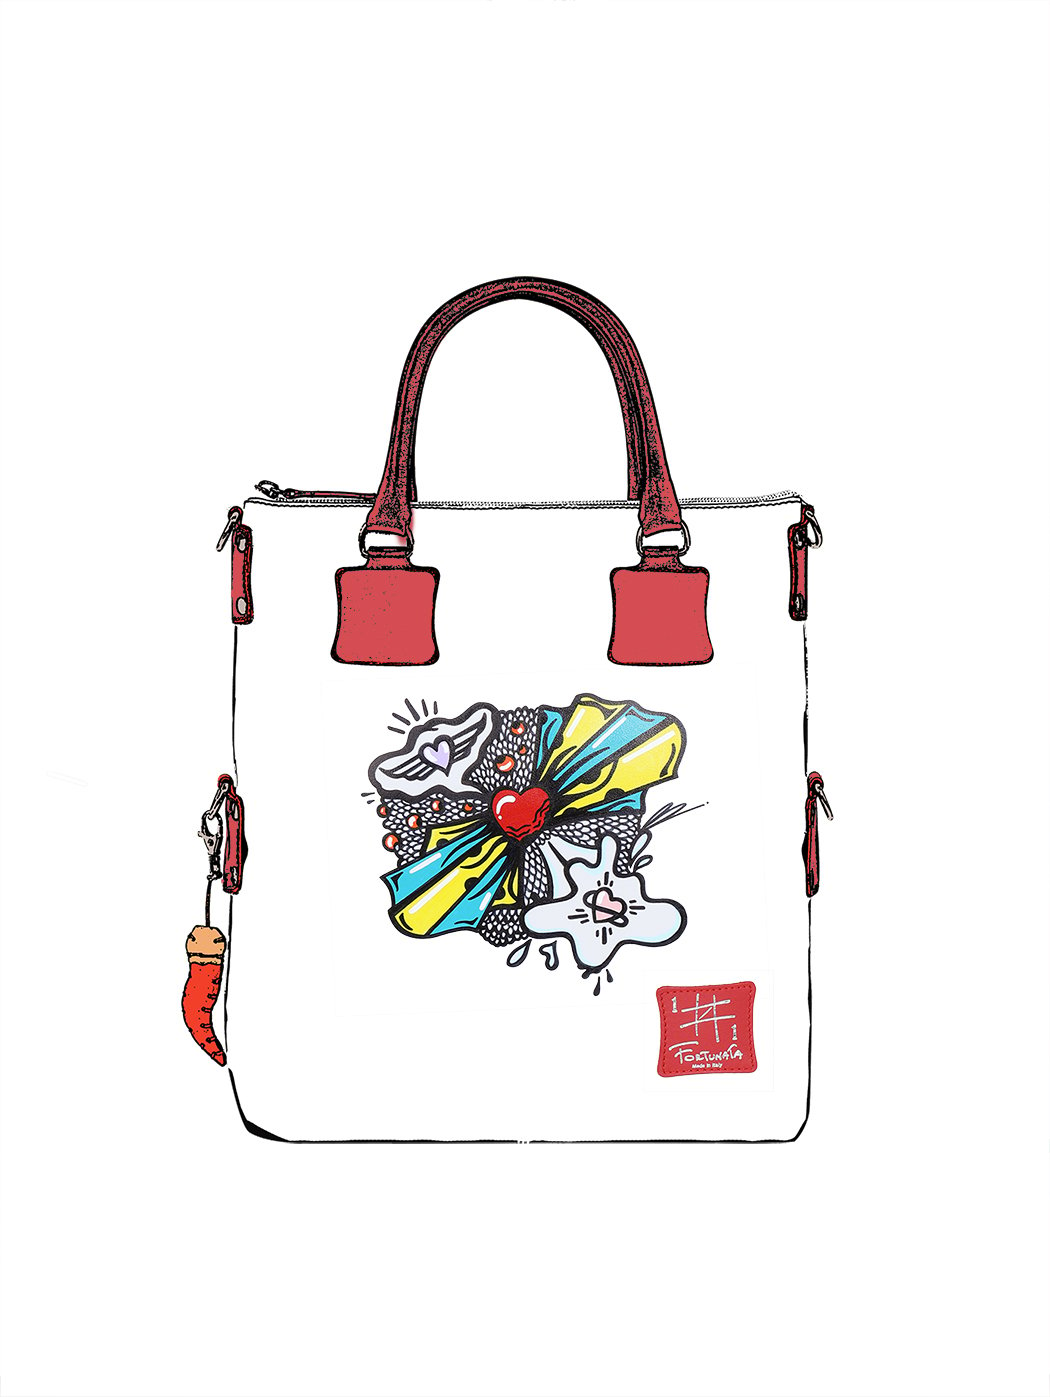 Tote Bag with shoulder strap - Doodle by Fortunata